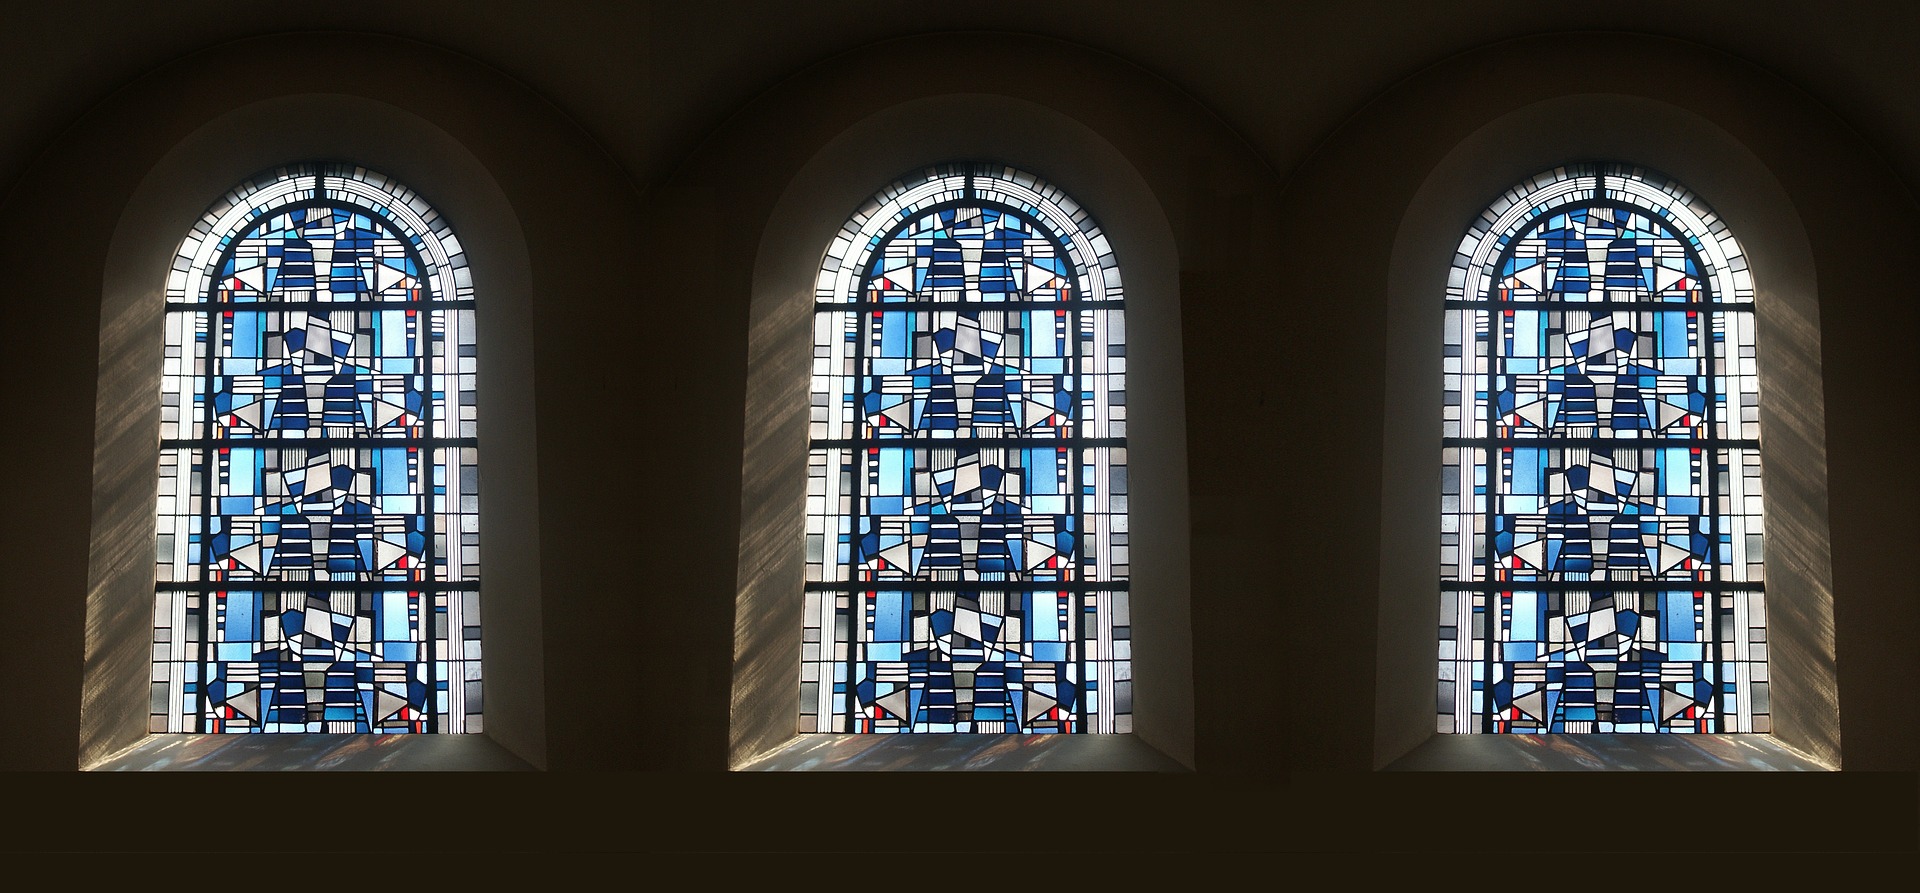 This image displays blue stained glass, in three arched windows.